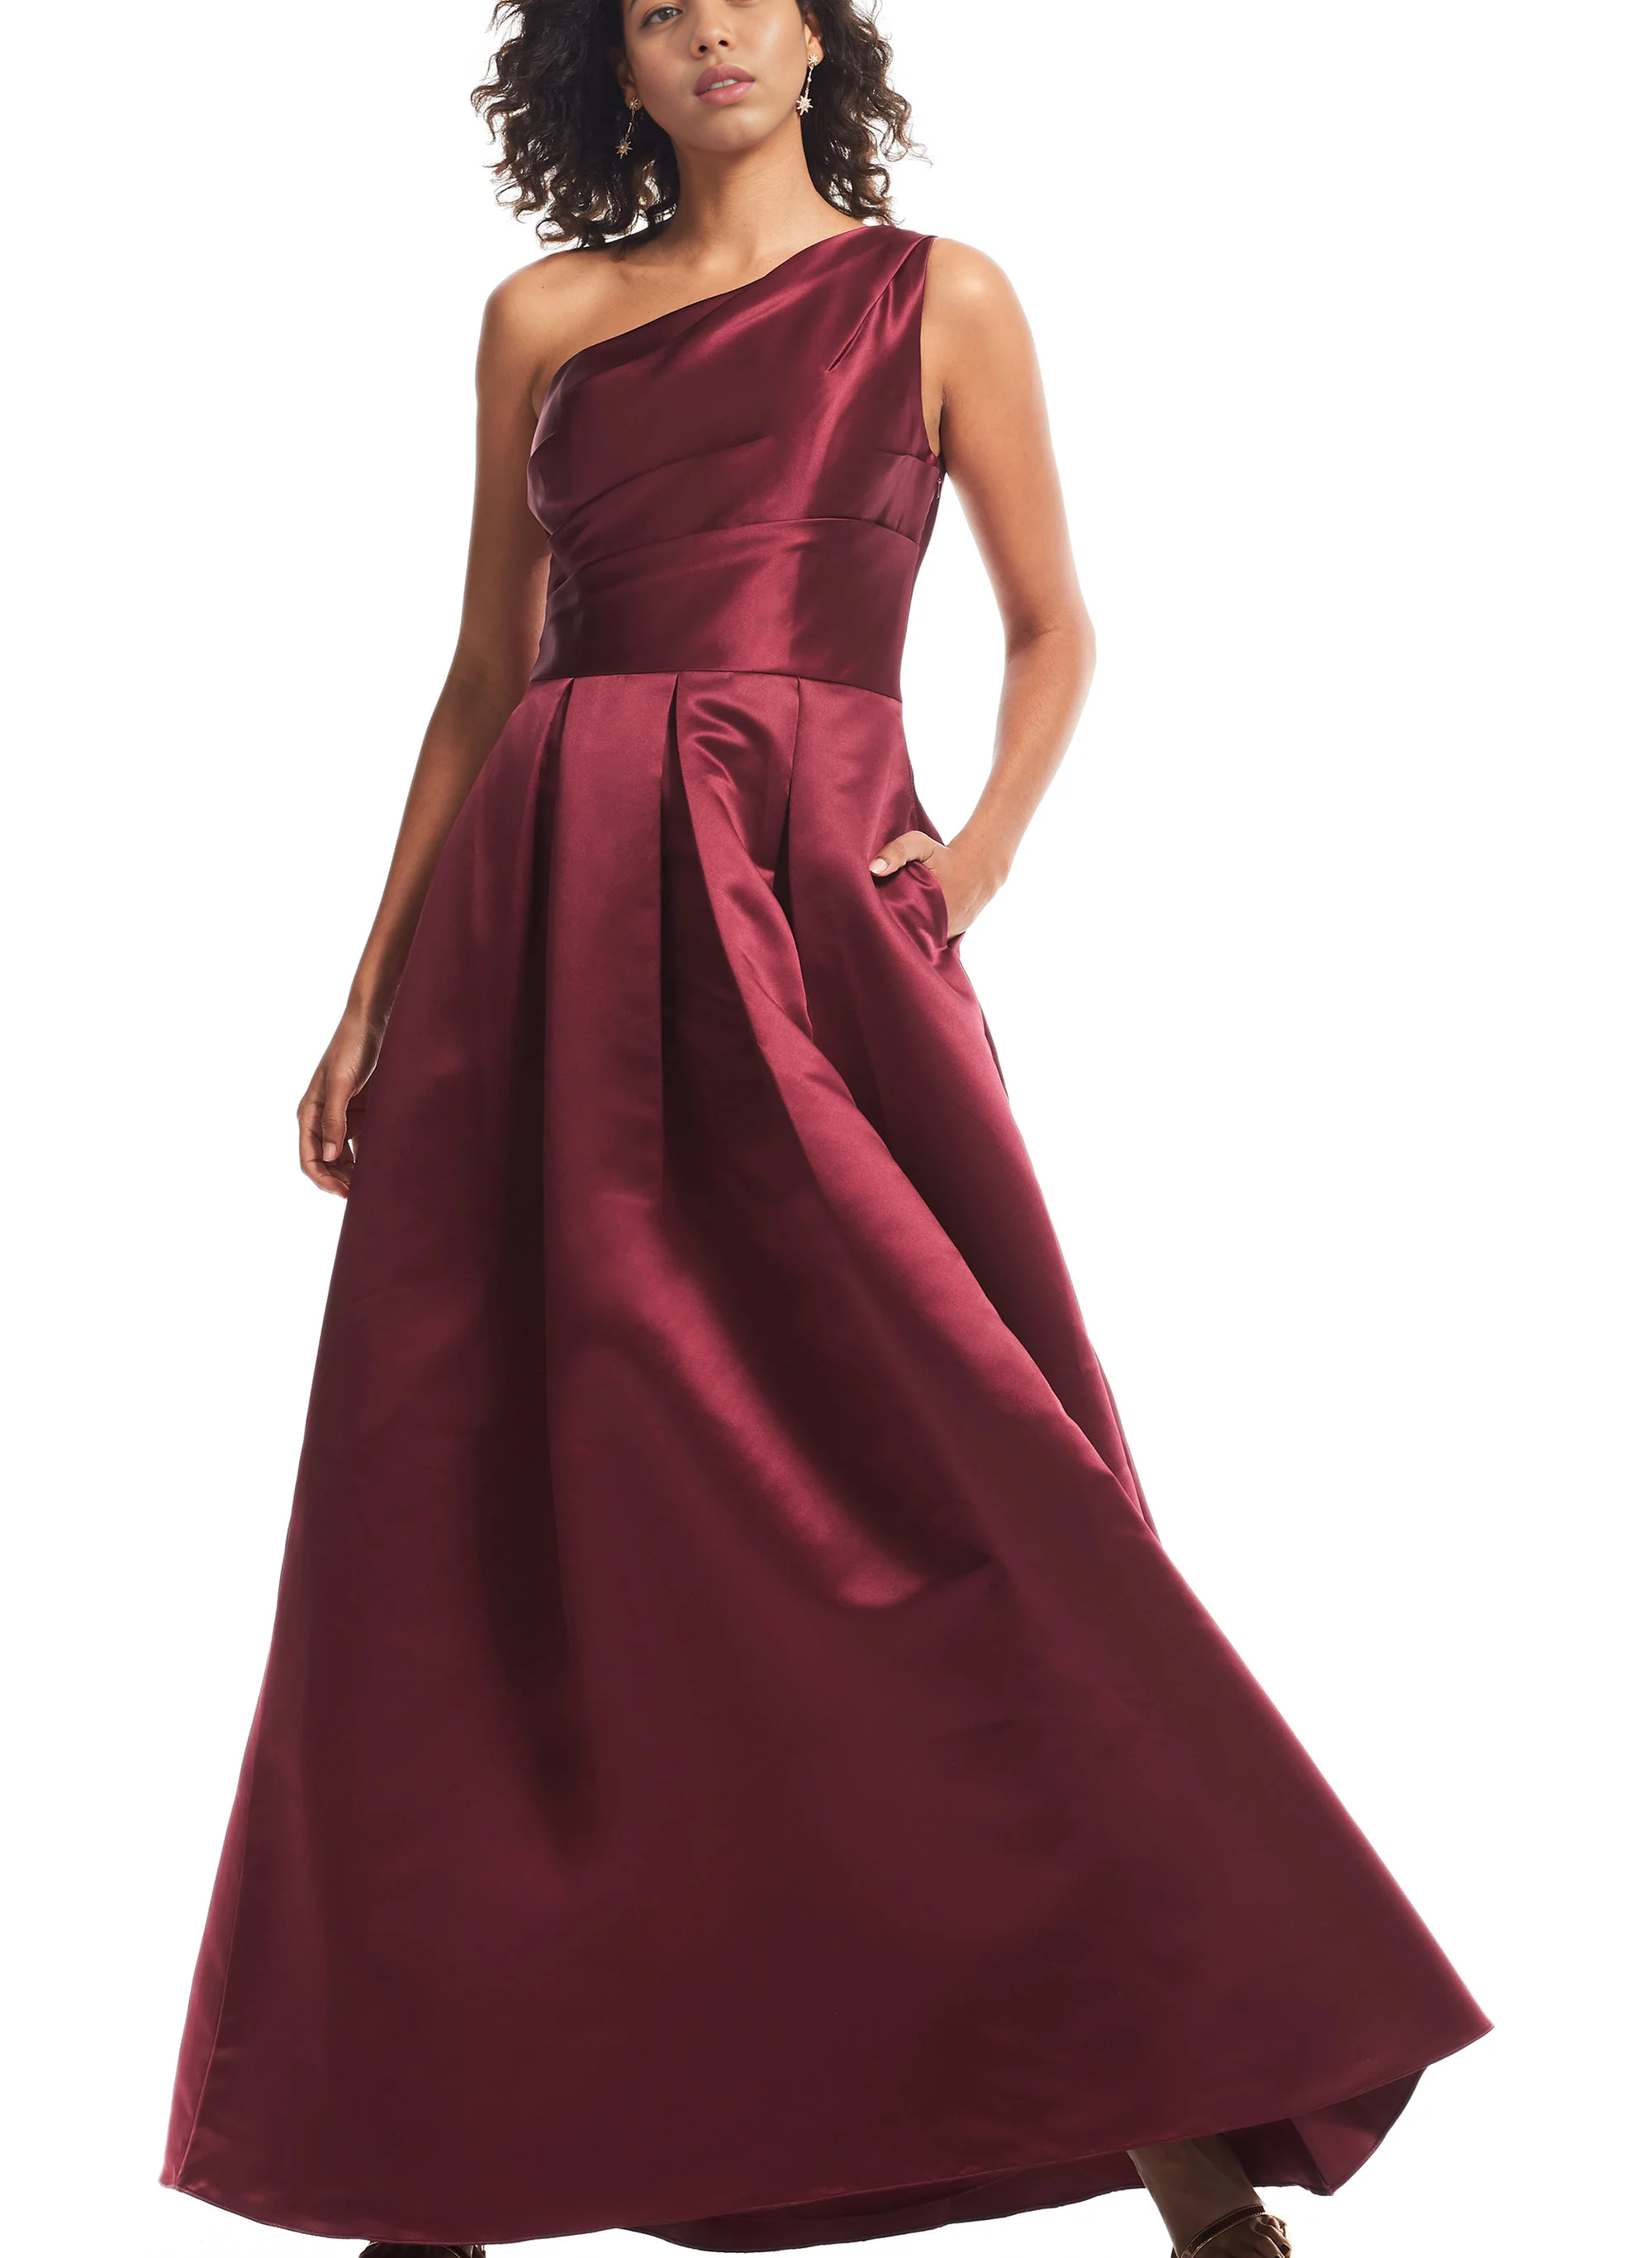 Wine Satin One-Shoulder A-Line Bridesmaid Dresses With Pockets